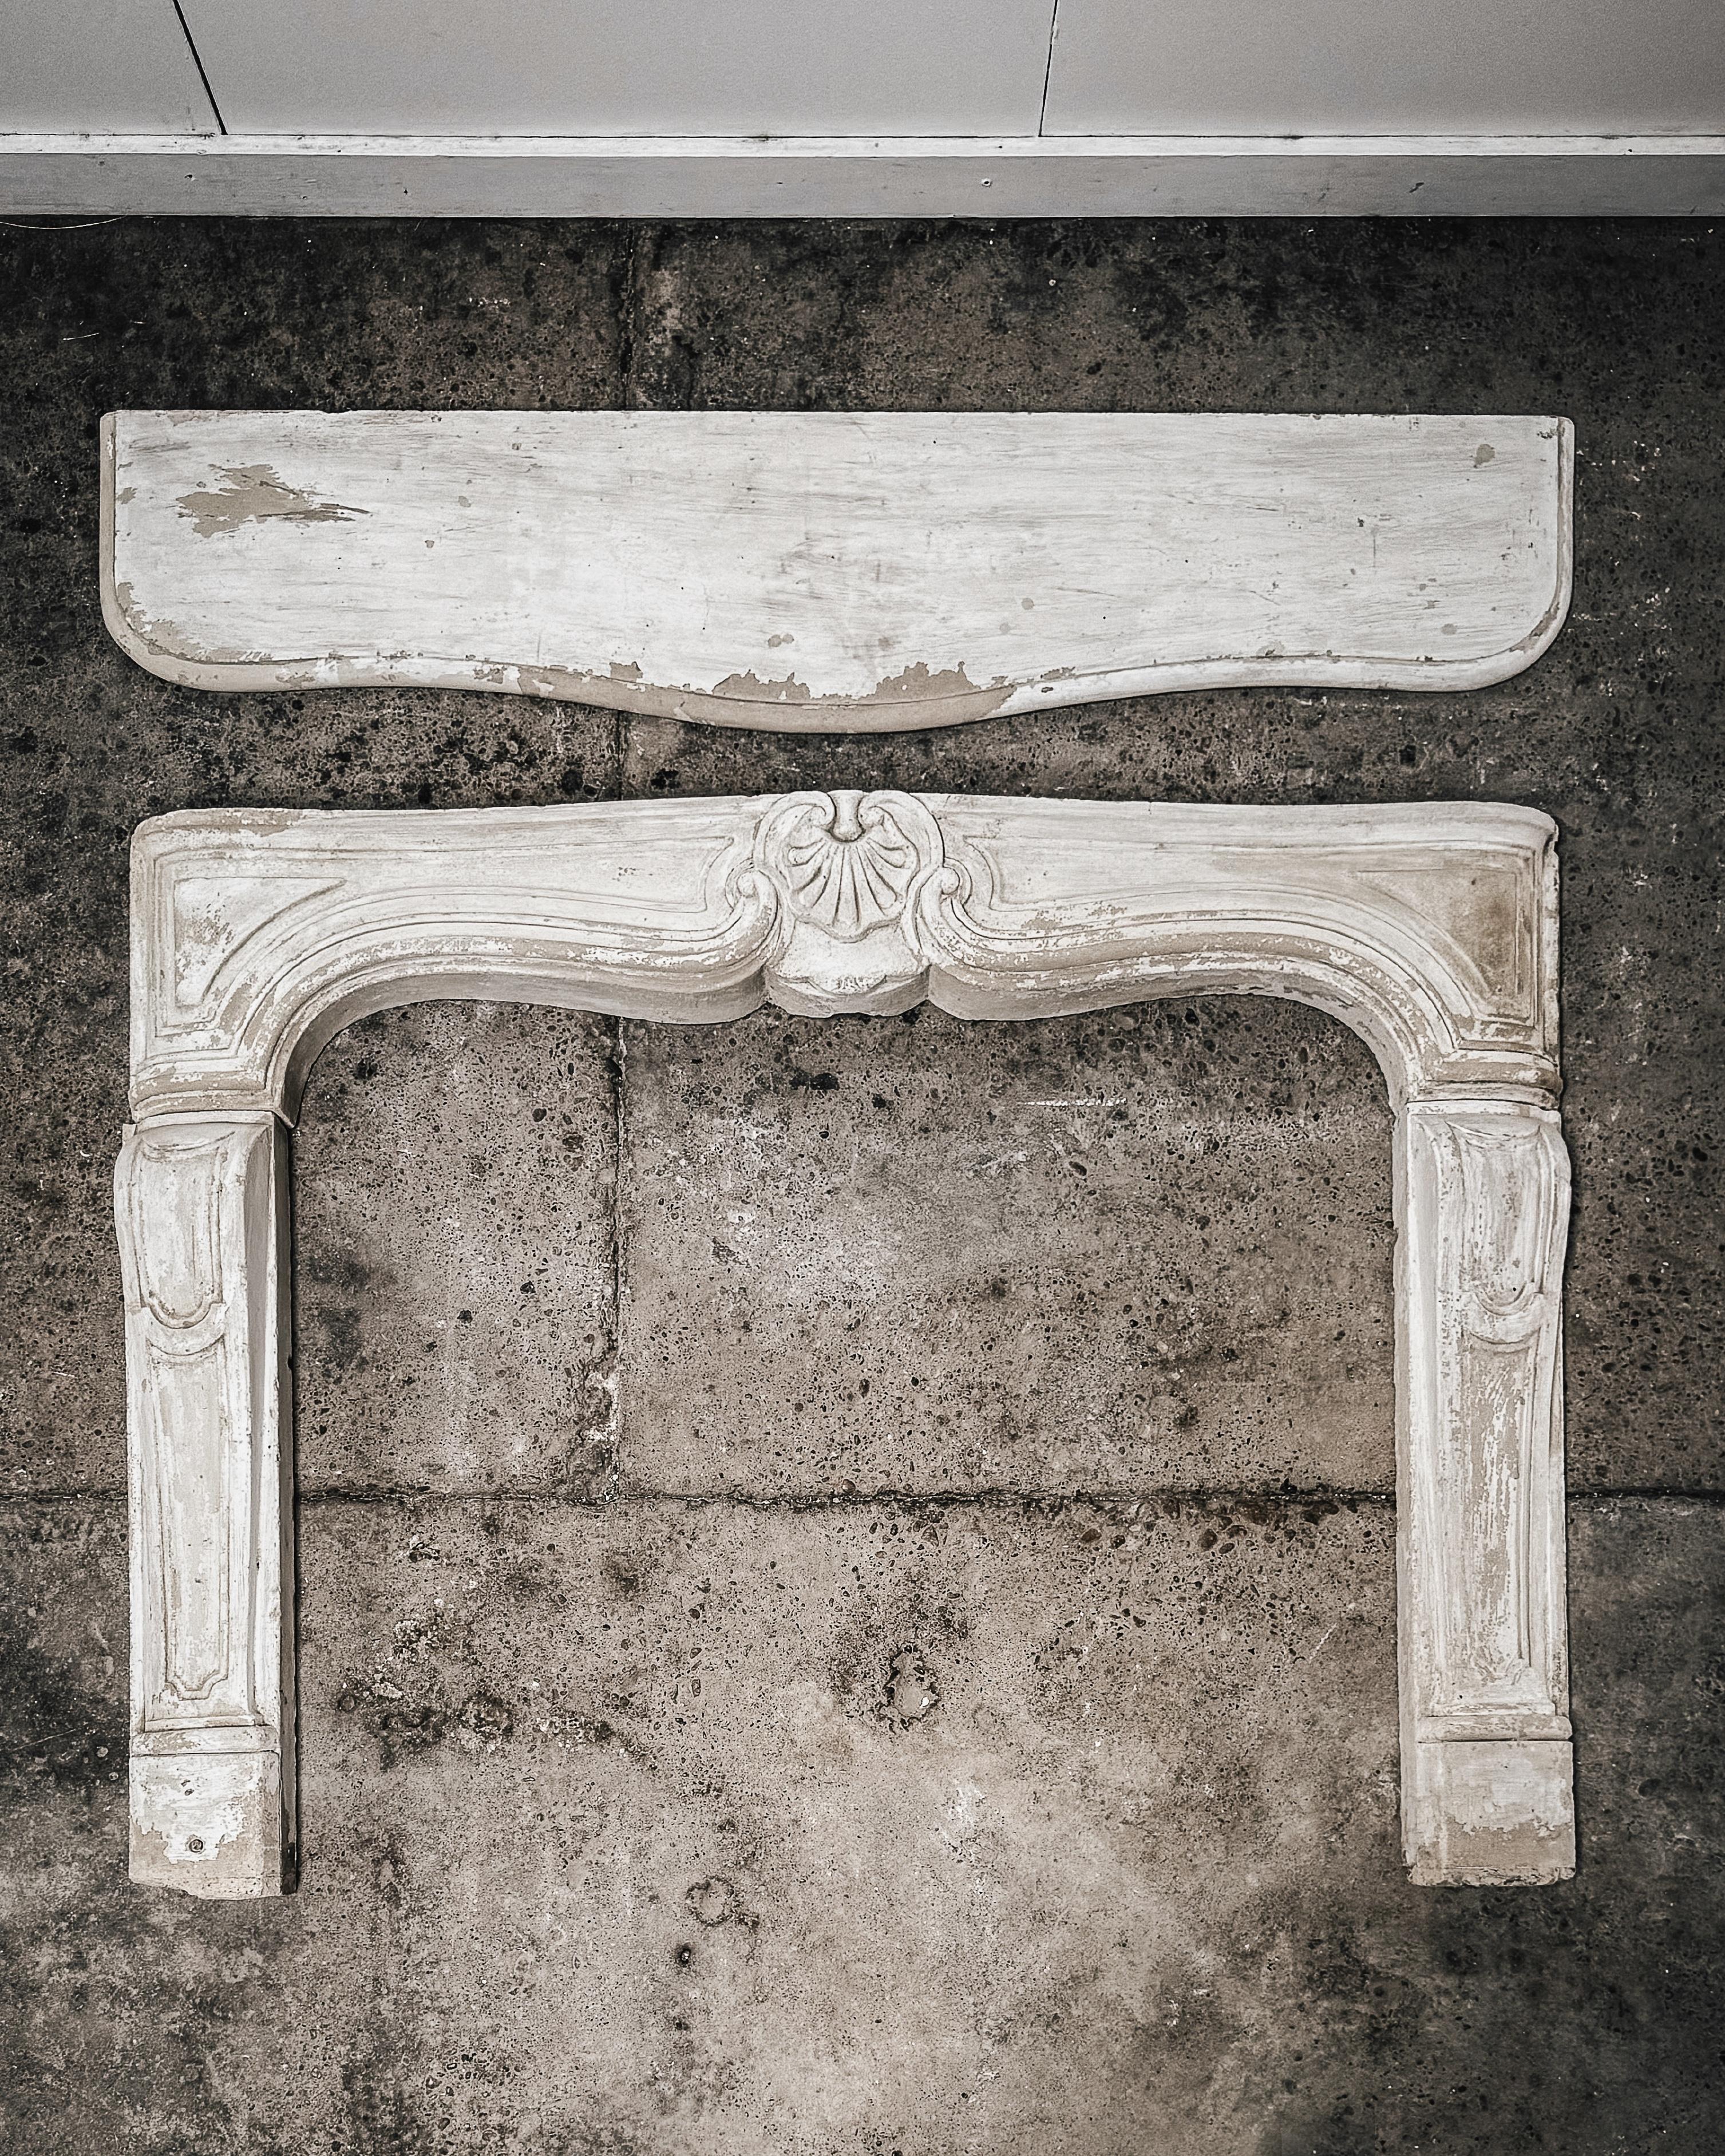 Salvaged from a countryside chateau in northern France, this fireplace mantel exudes classic French style reminiscent of the Louis XV era. Crafted from limestone and dating to the late 18th century, it showcases intricate hand-carved architectural